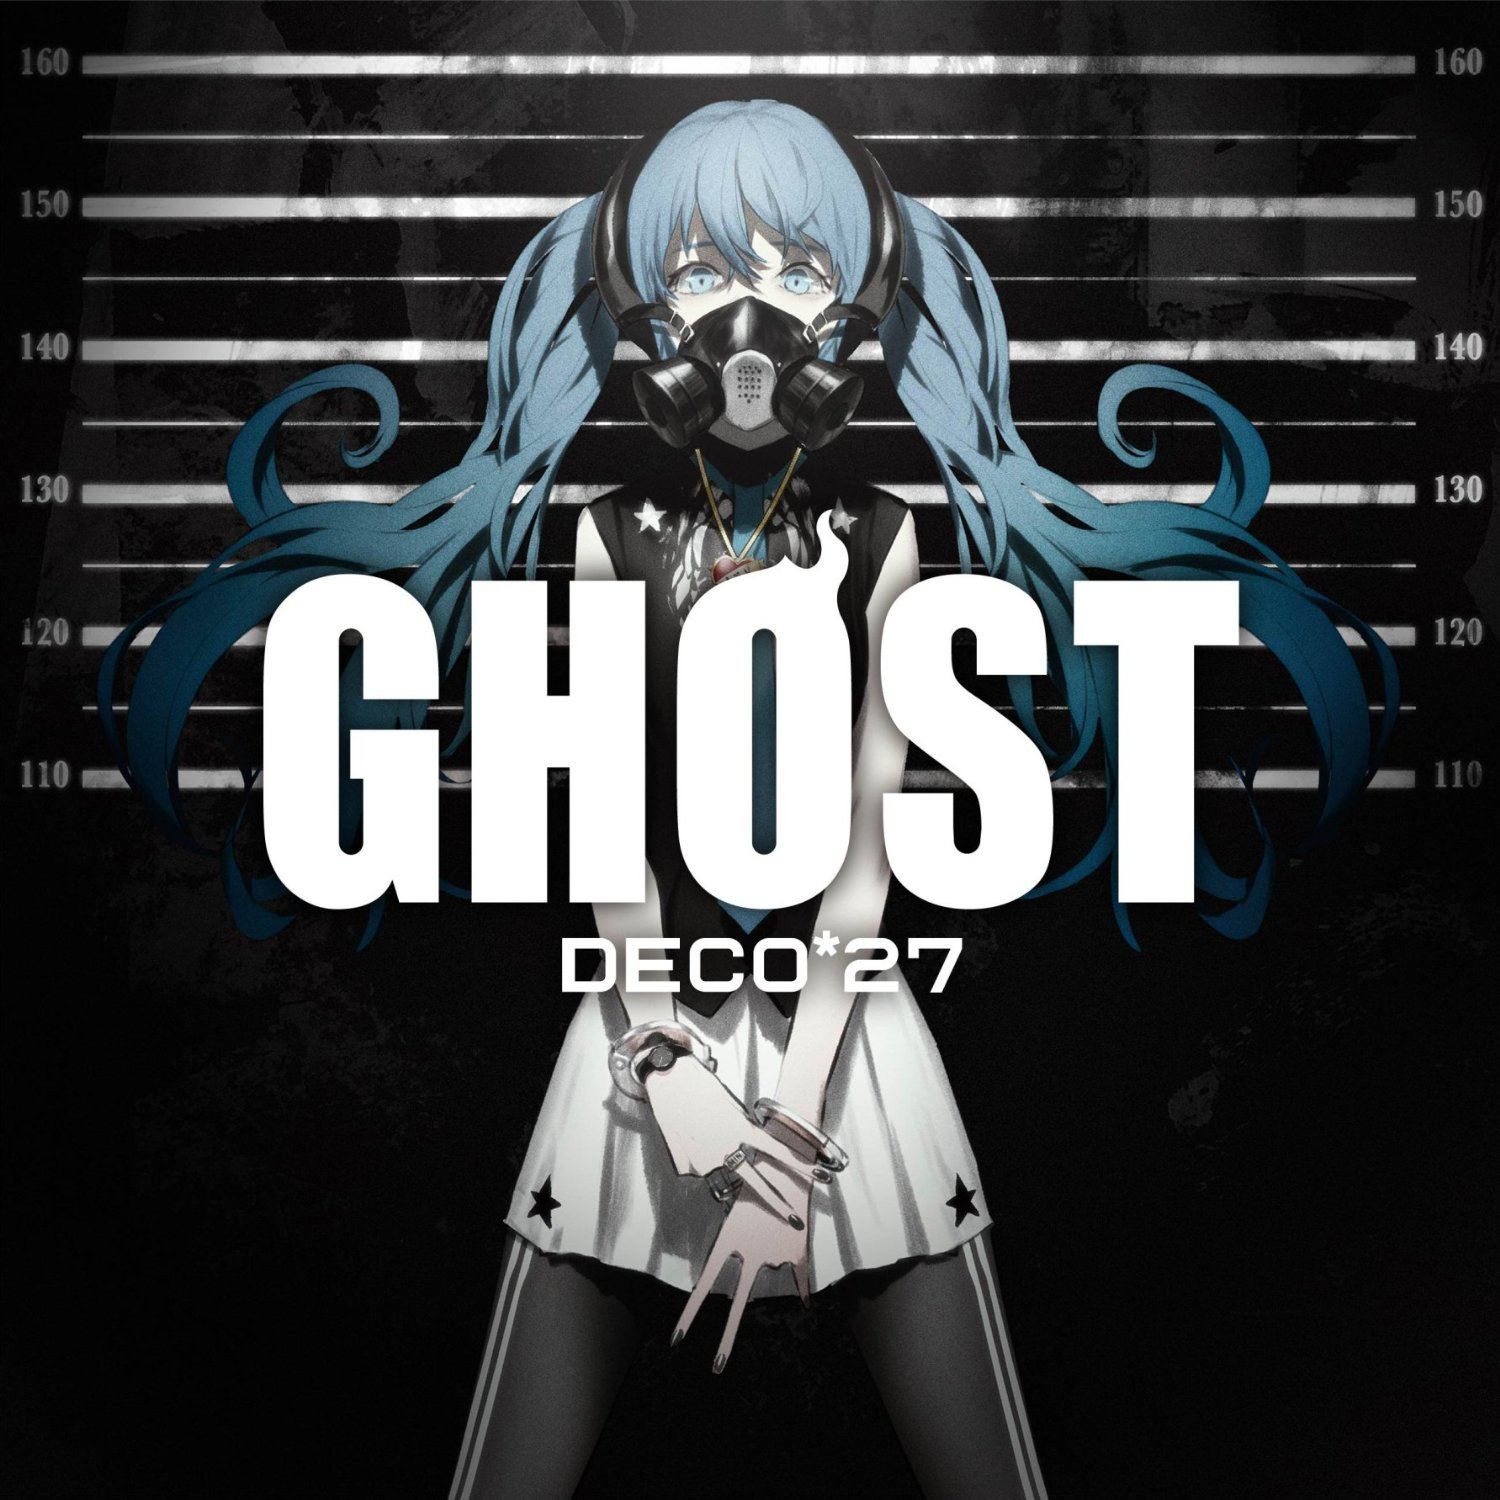 Ghost [CD+DVD Limited Edition] (Deco*27) - Bitcoin & Lightning 